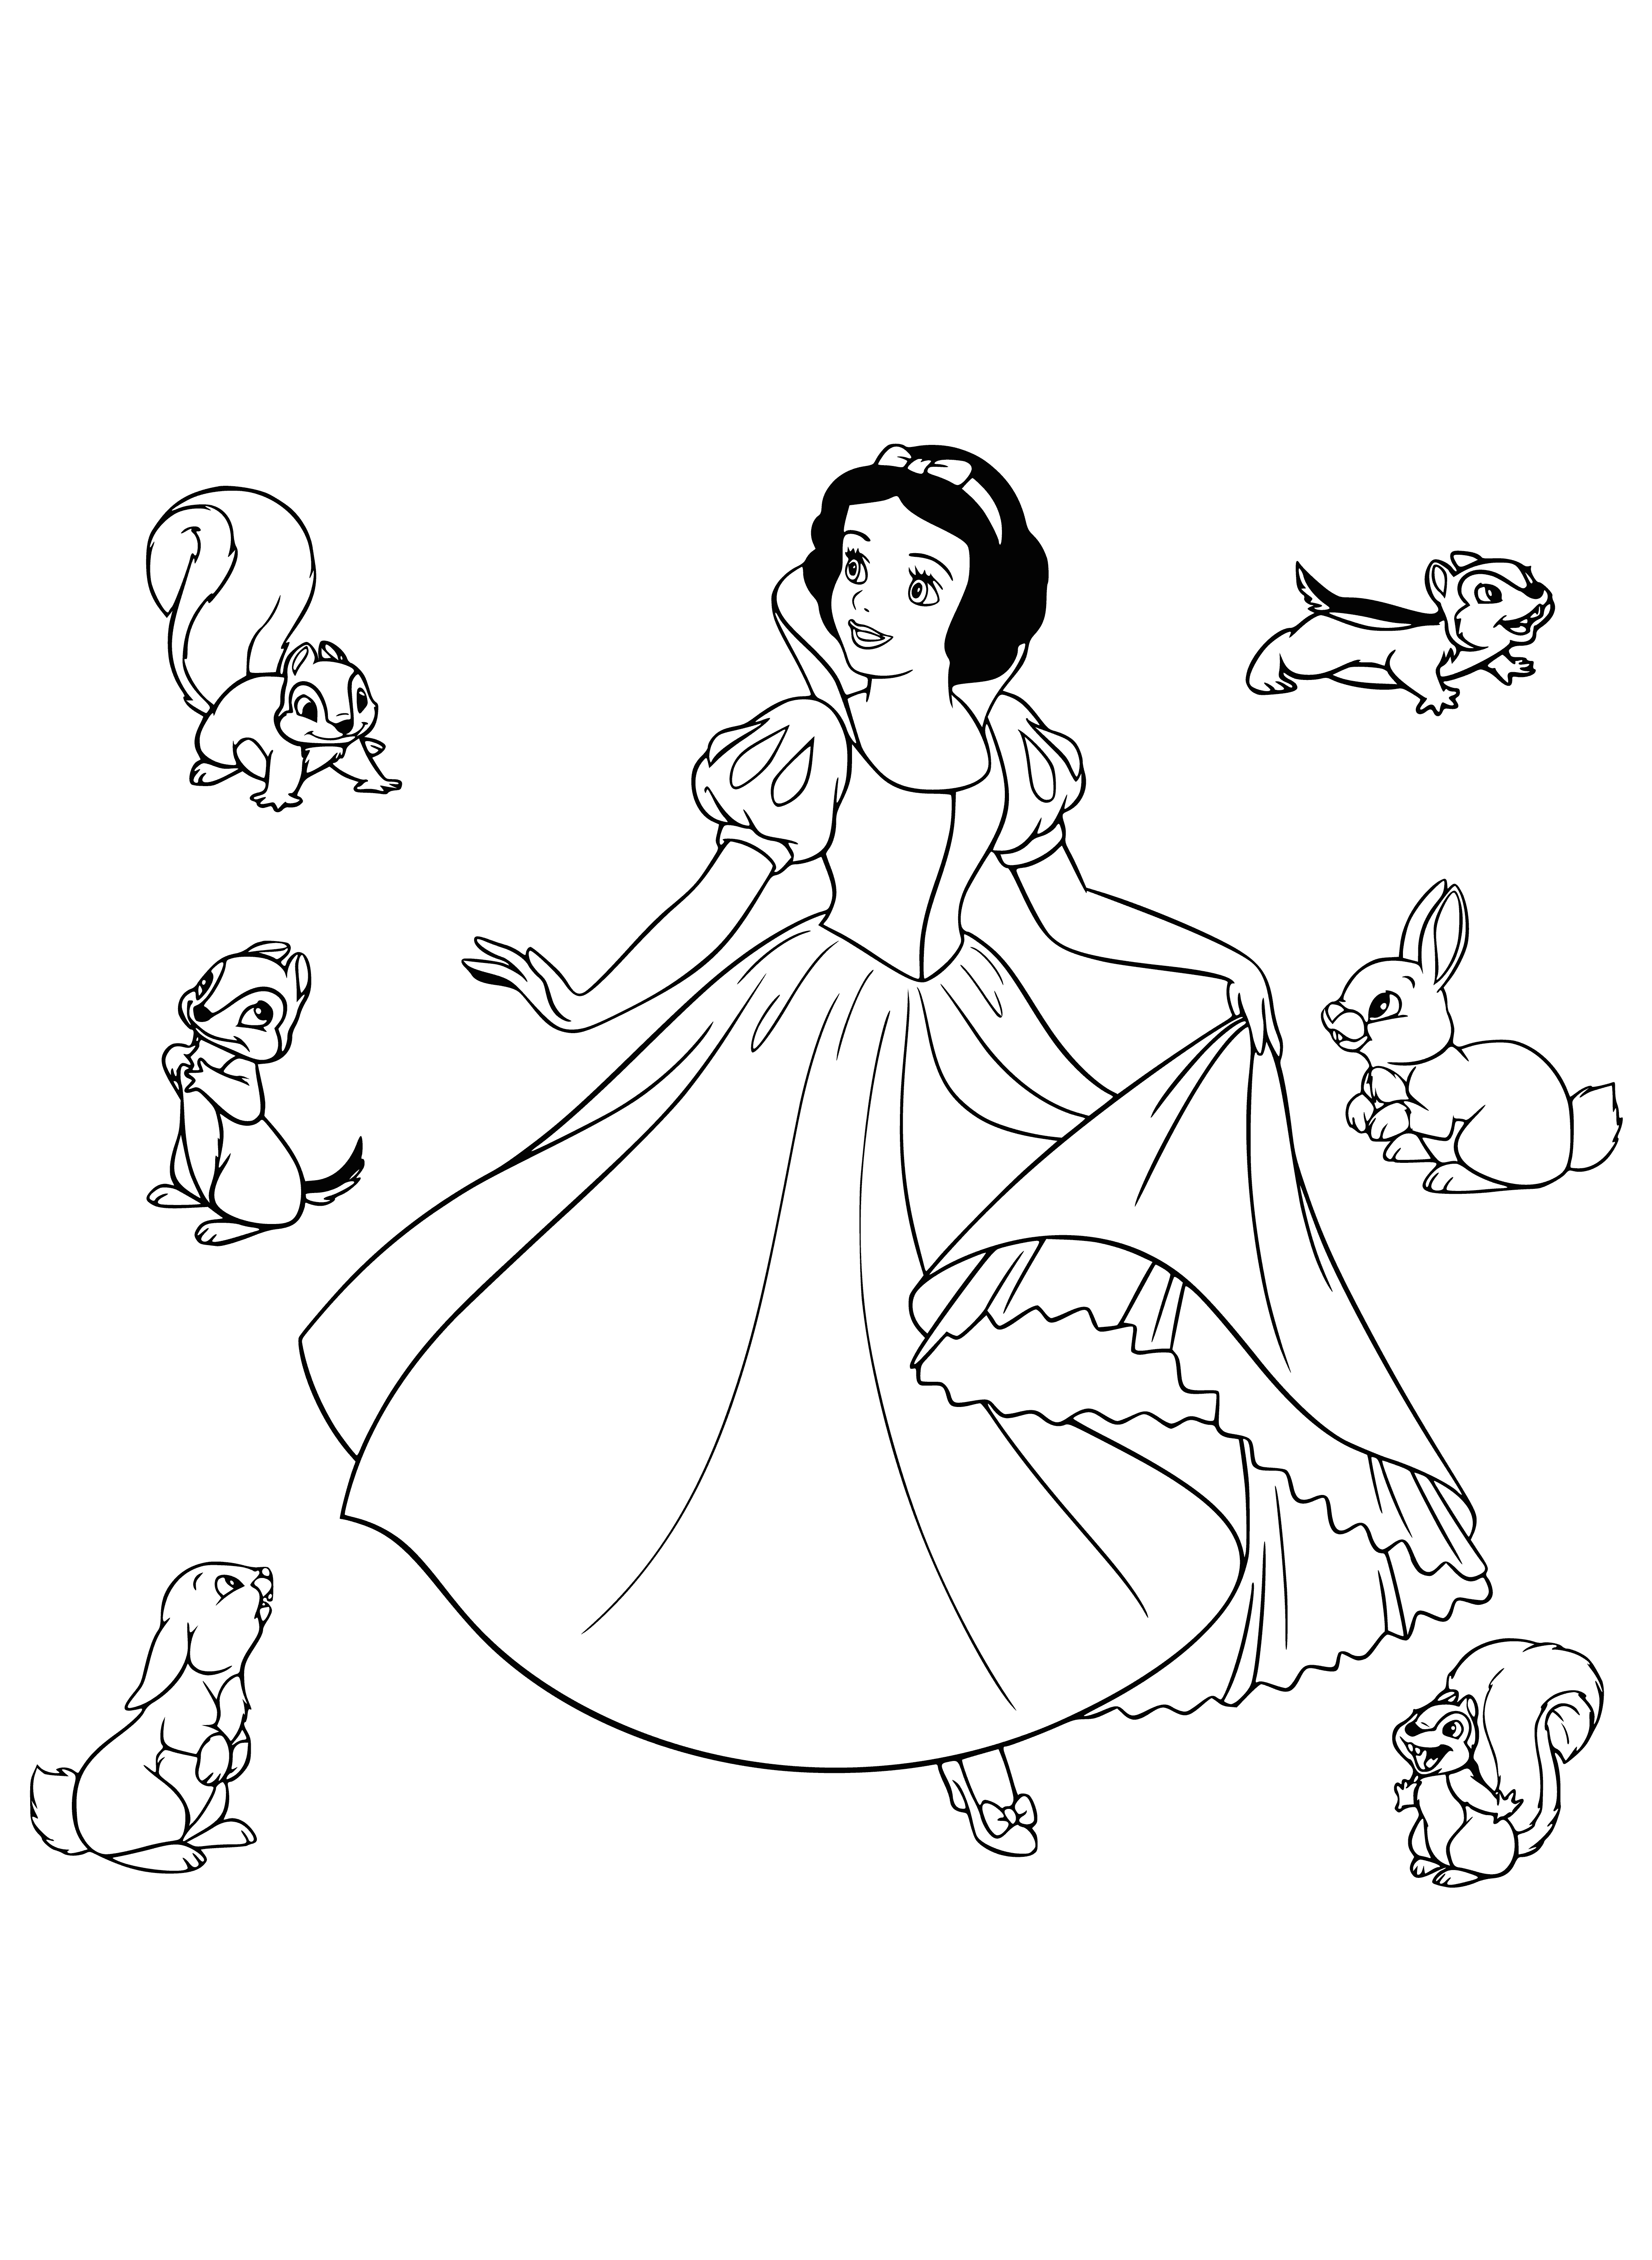 coloring page: Snow white is in a forest surrounded by a deer, bunny, squirrel, bird, and chipmunk, all looking content. She is in deep thought.